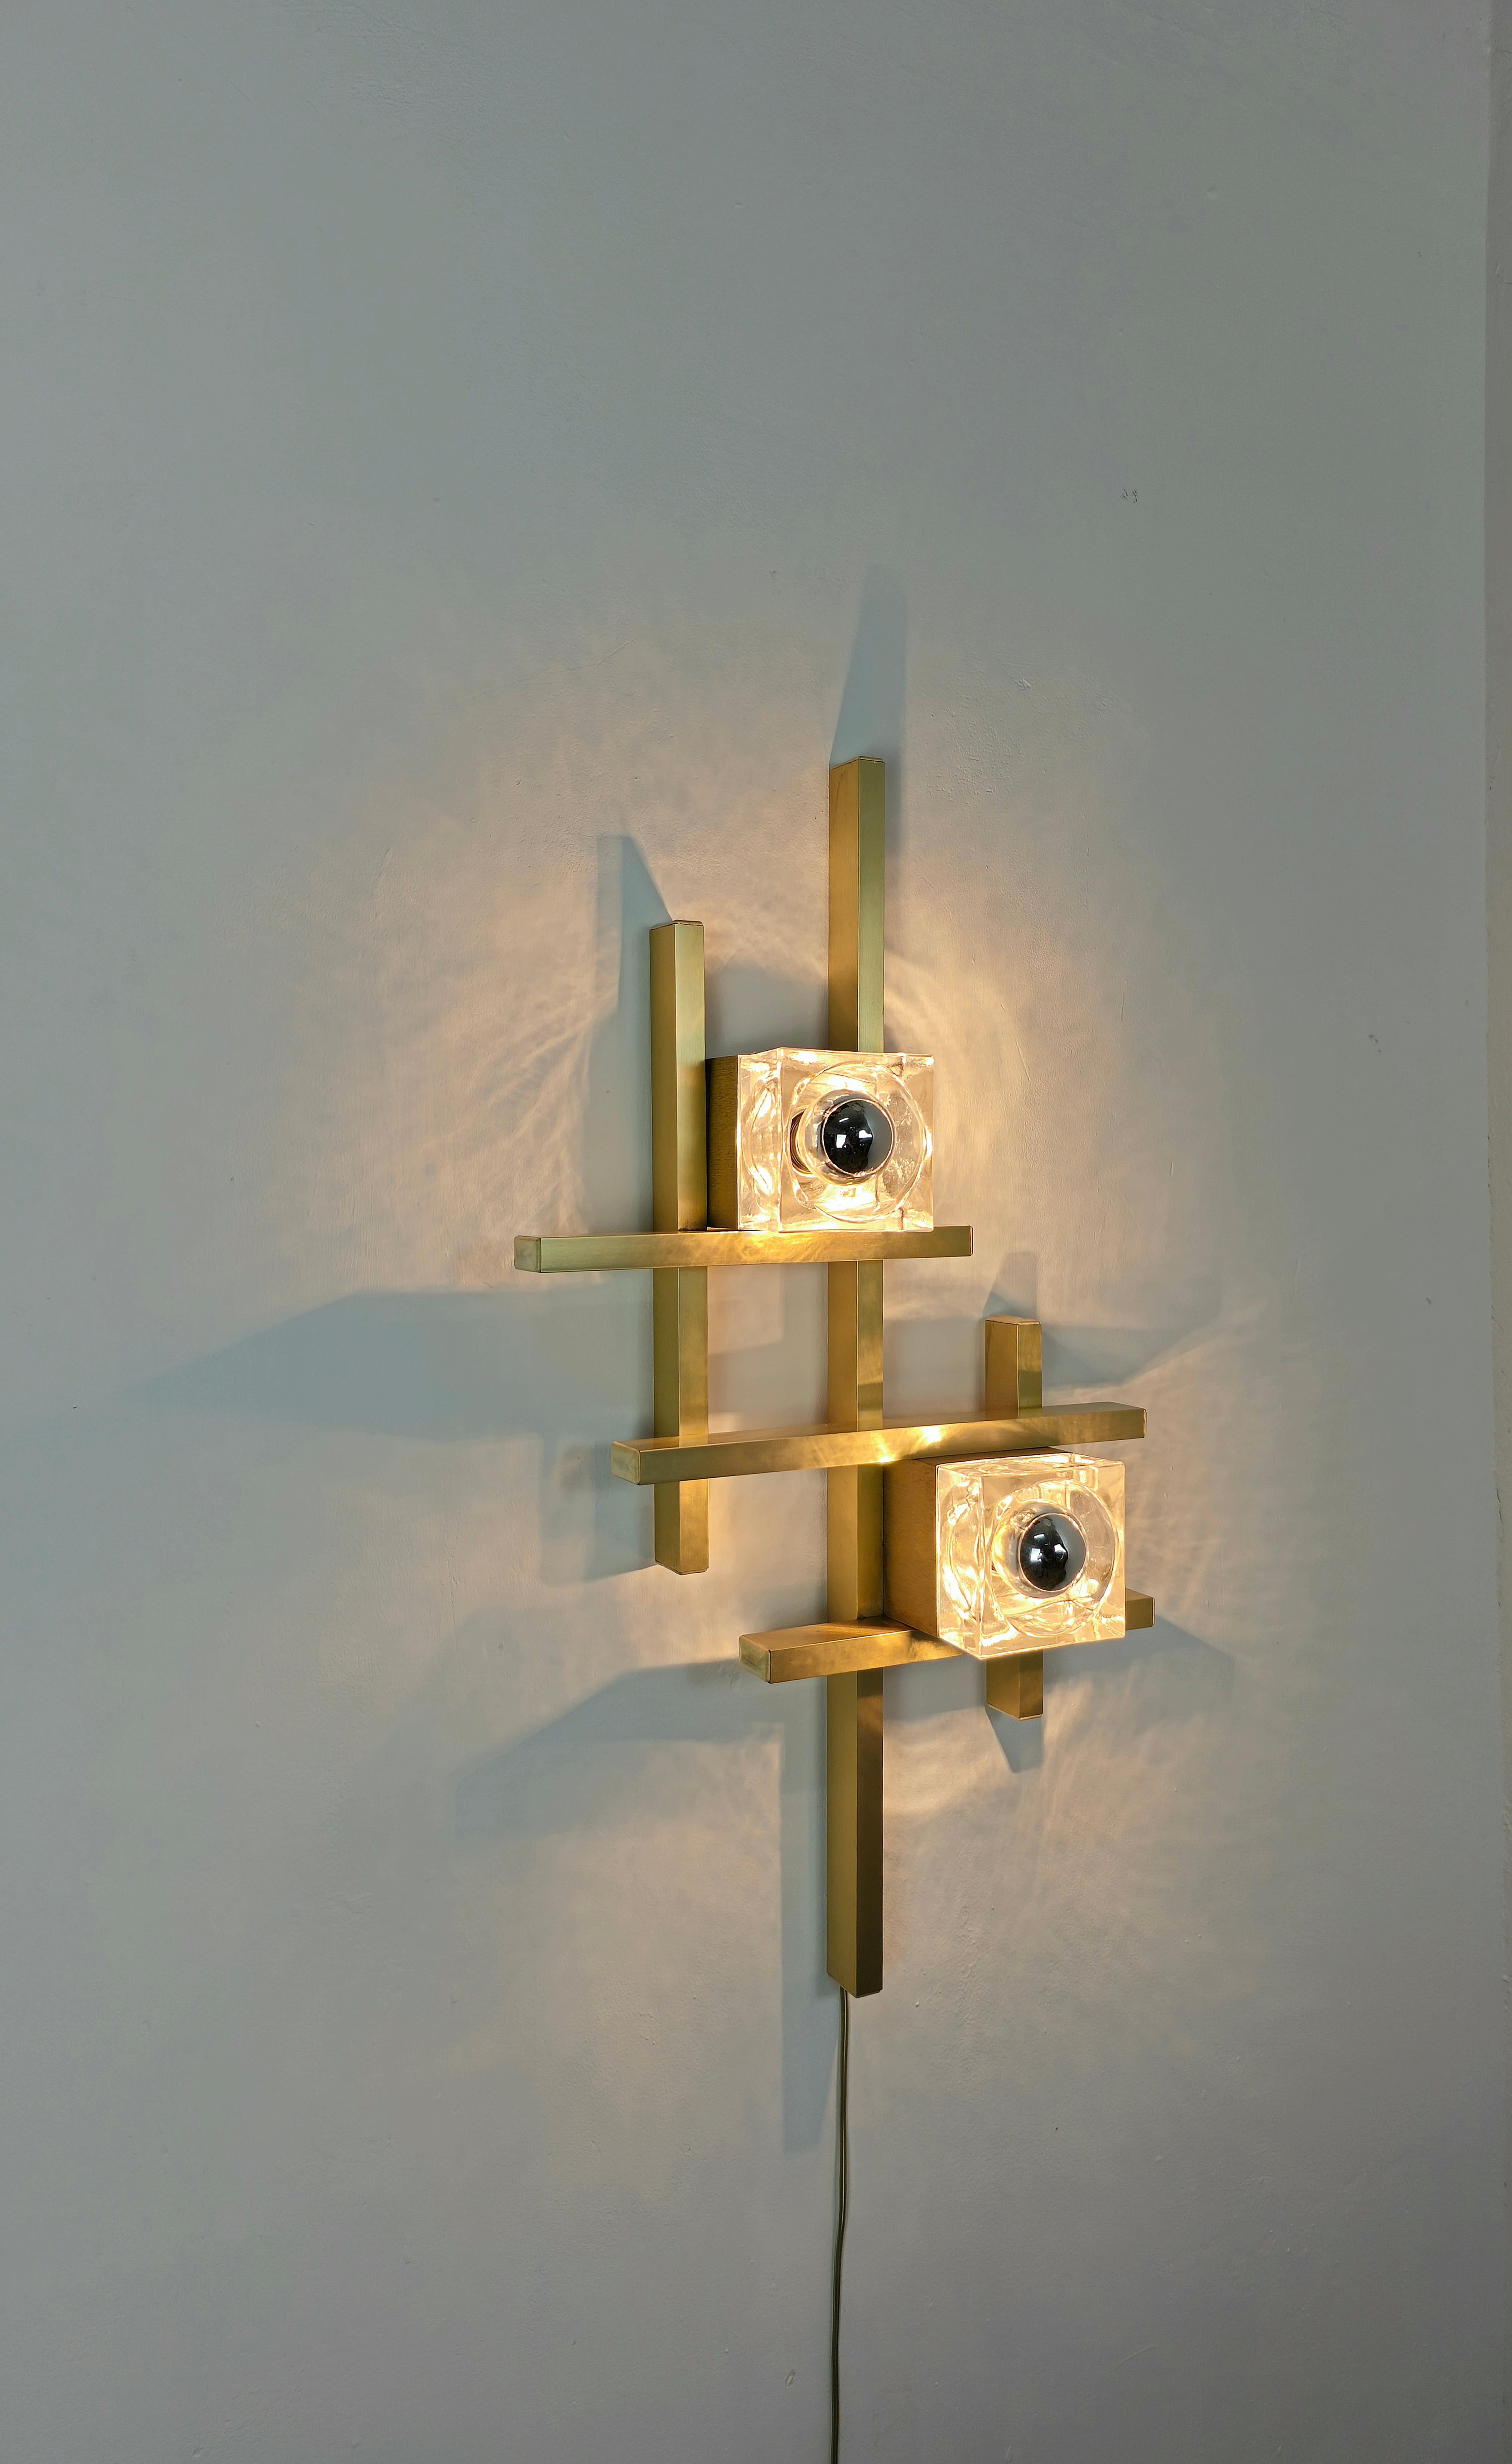 Wall lamp designed by the well-known designer Gaetano Sciolari and produced in Italy in the 70s.
Sculptural wall lamp in golden aluminum with two double glass and cubic-shaped glasses.